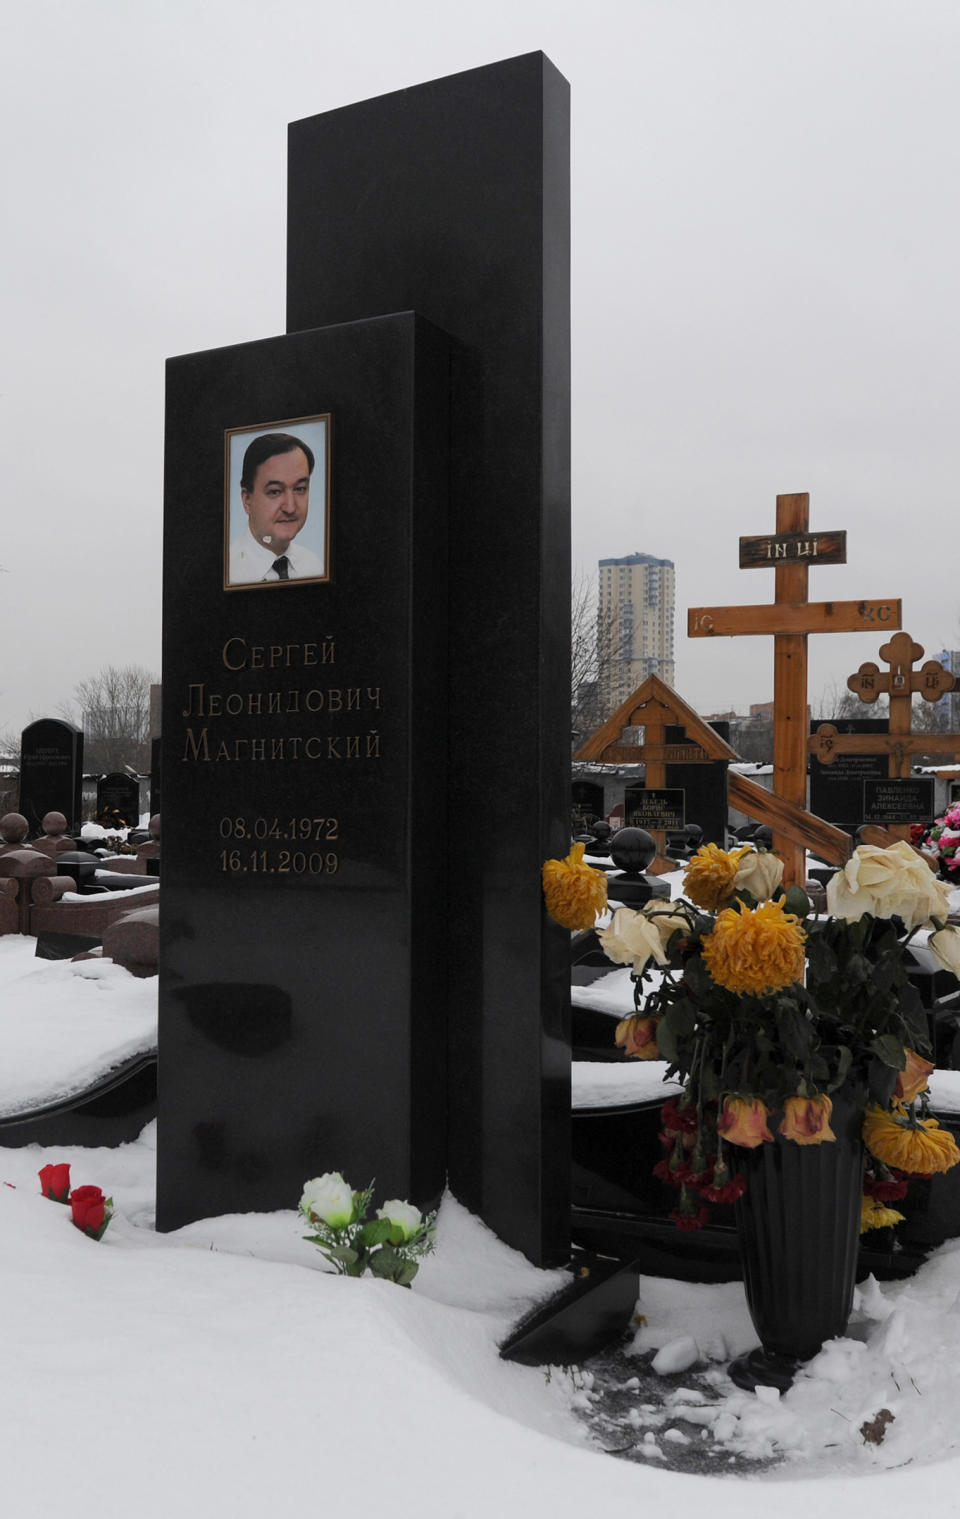 The grave of Russian lawyer Sergei Magnitsky at the Preobrazhenskoye cemetery in Moscow on Dec. 7, 2012.<span class="copyright">Andrey Smirnov—AFP/Getty Images</span>